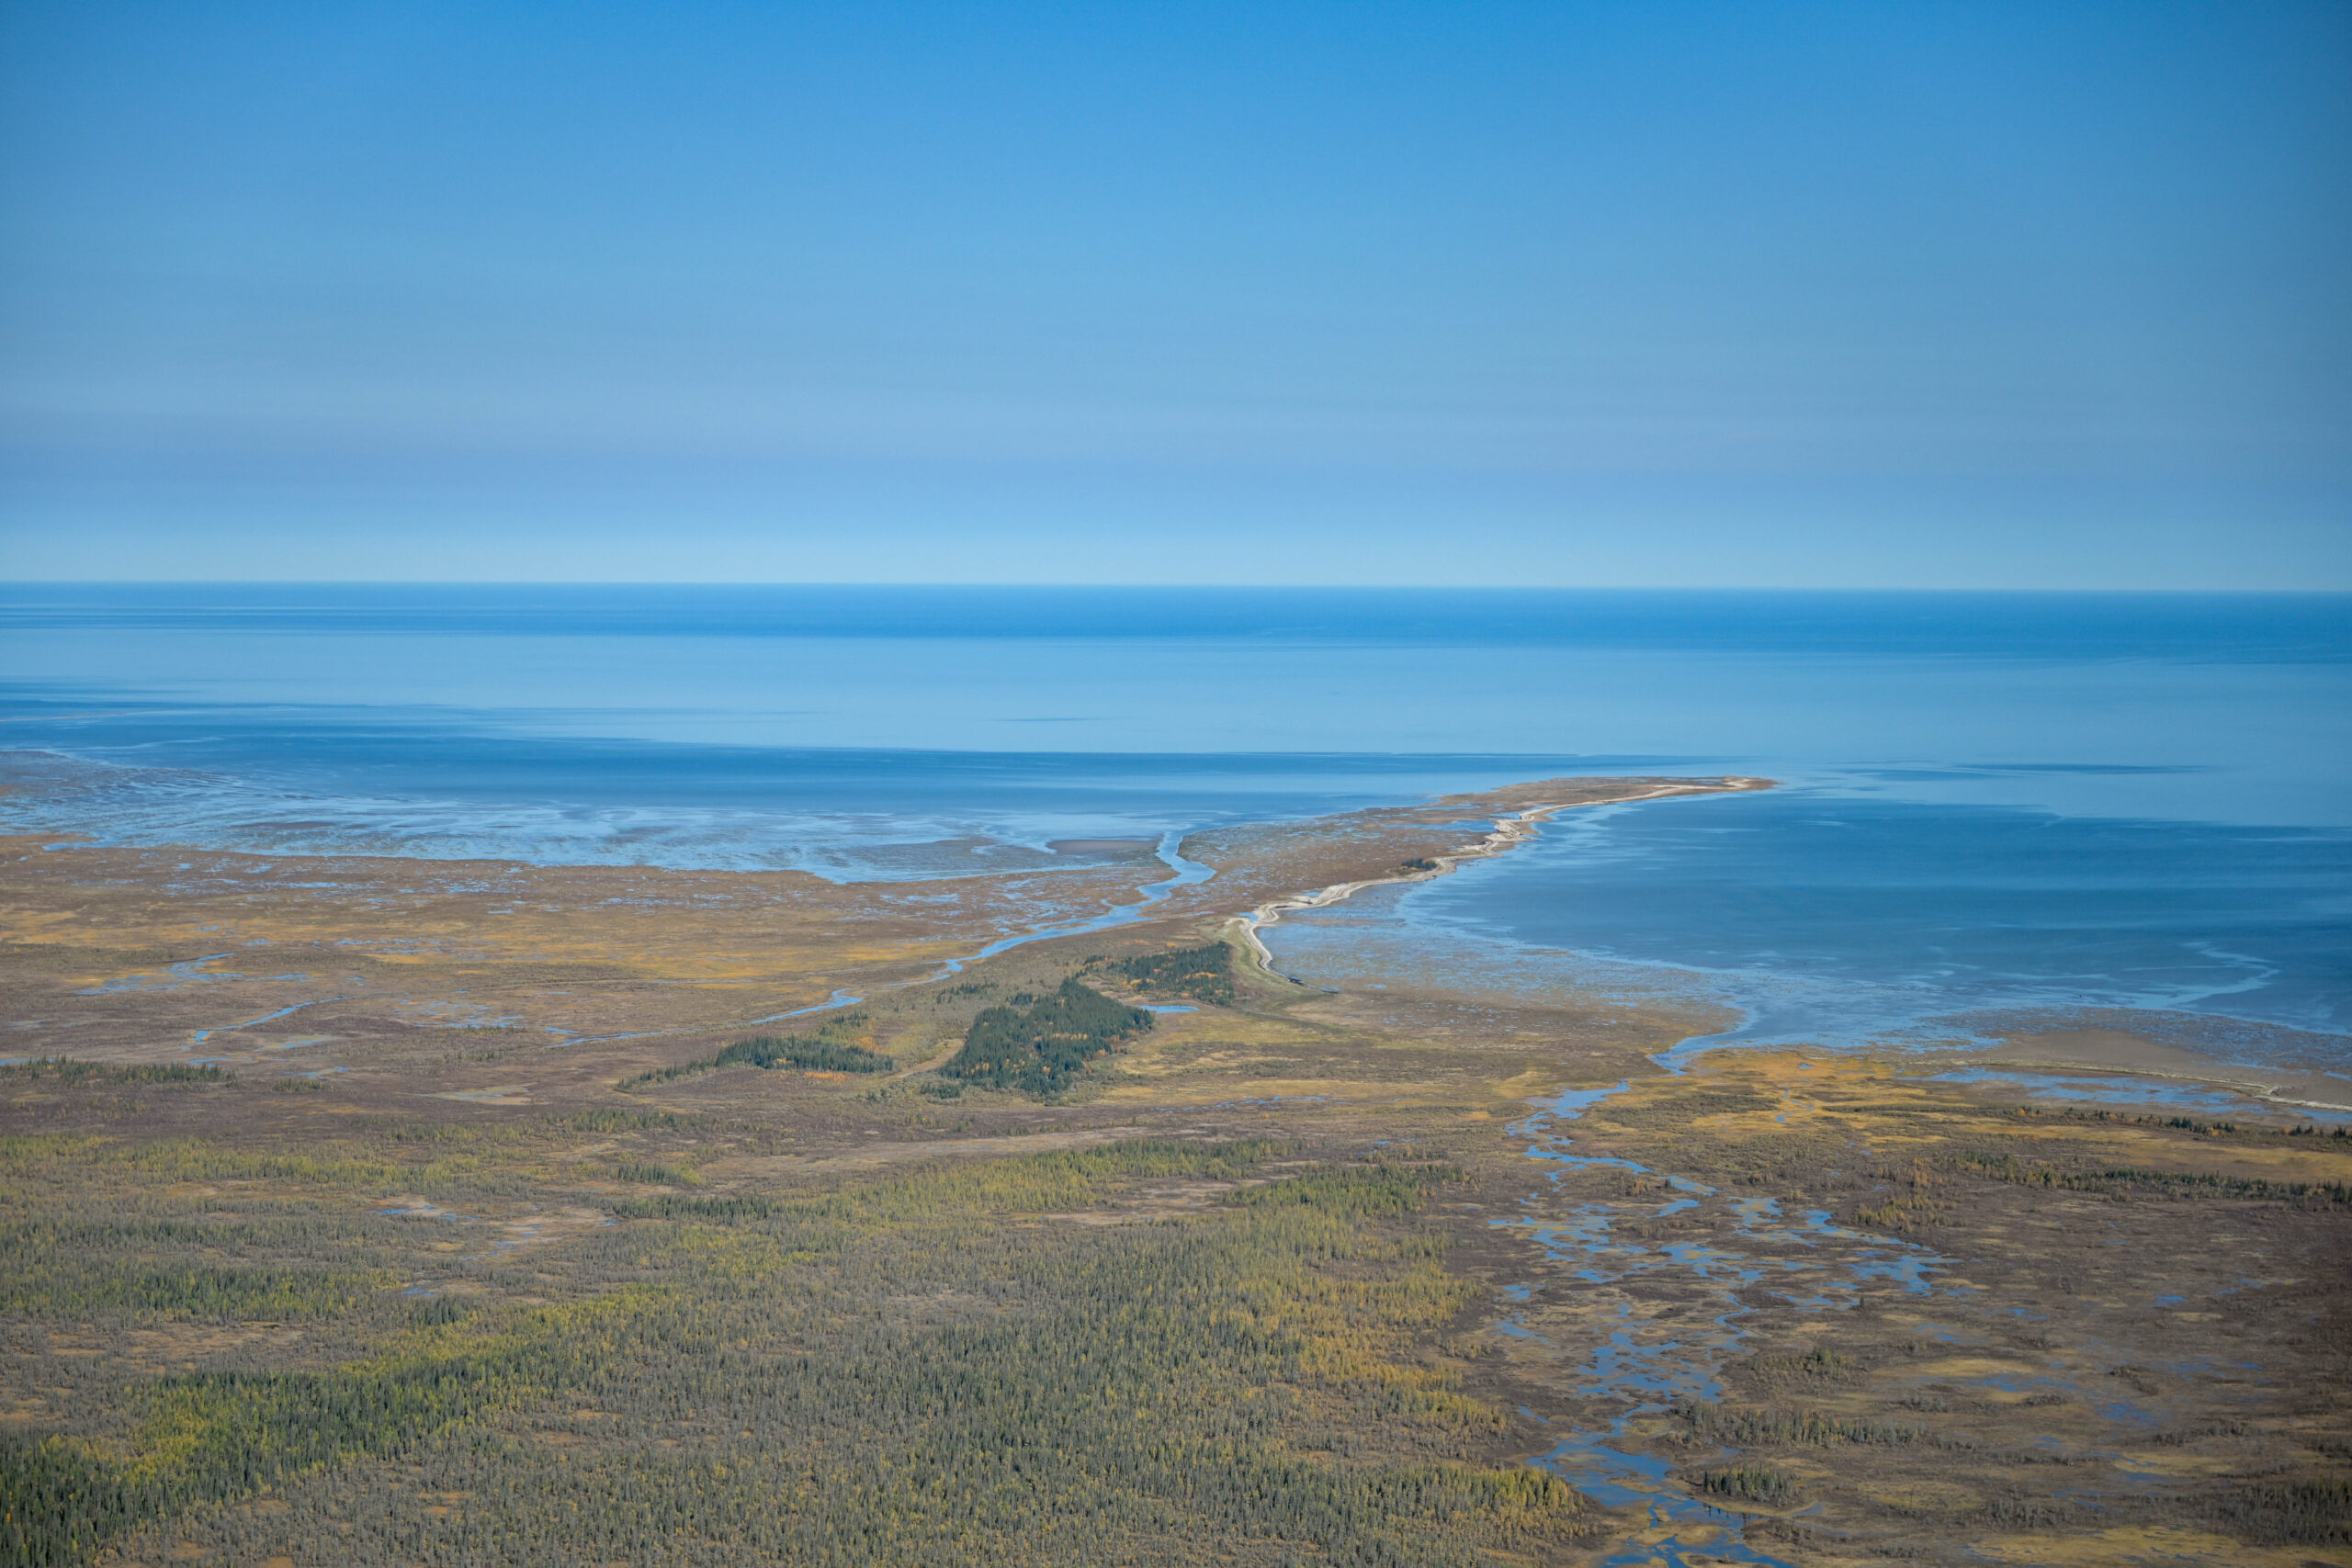 Hudson Bay lowlands featured in presentation at Timmins Museum on Sunday -  My Timmins Now